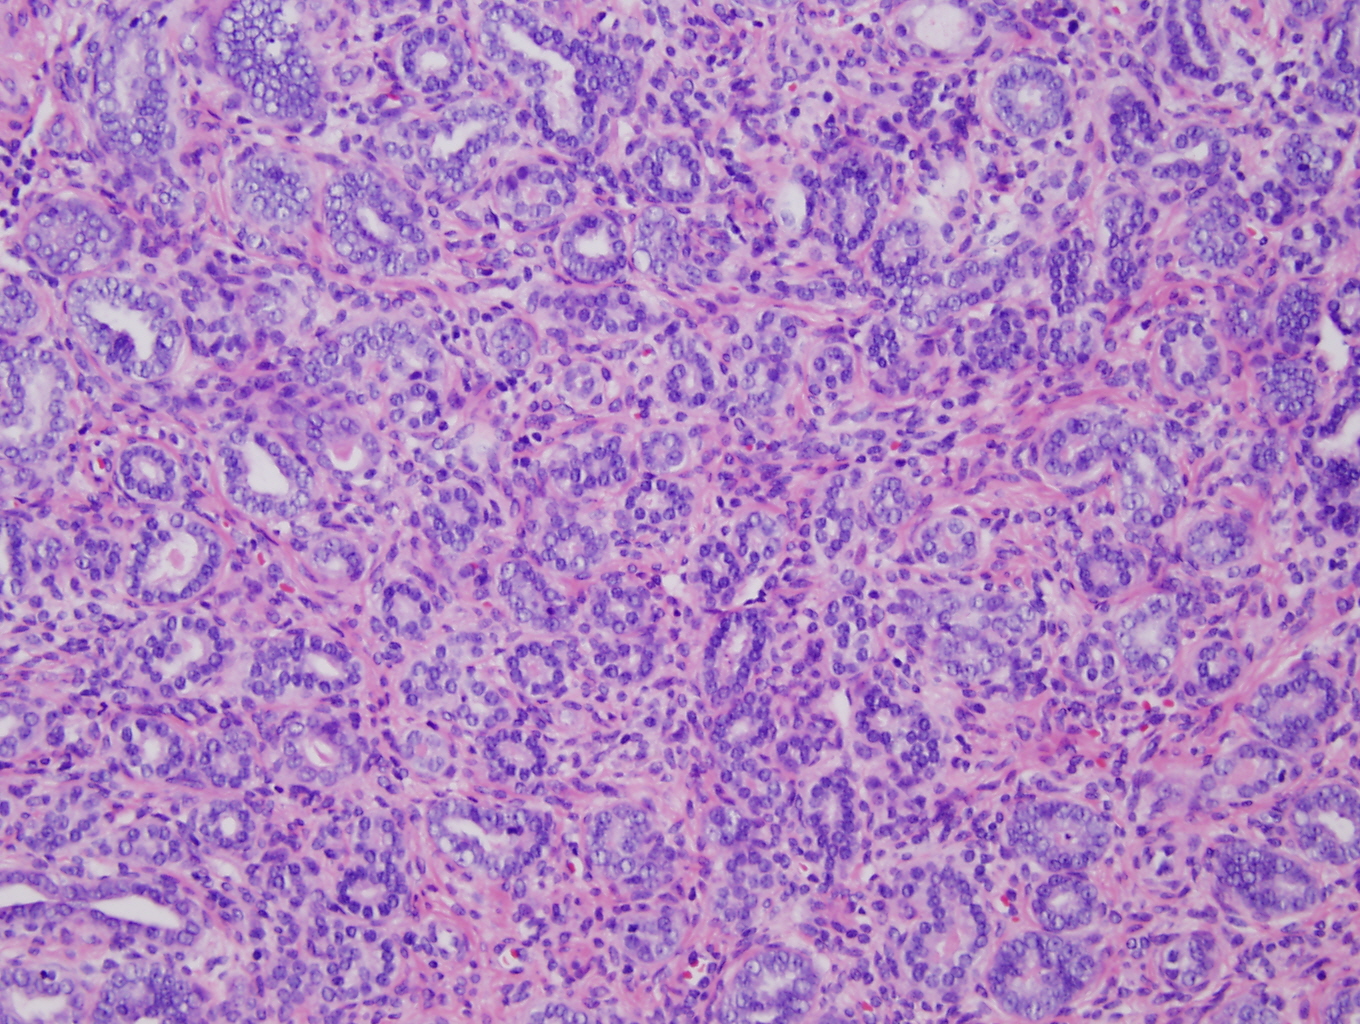 Figure 4: High power (20X) view of tumor from cervix showing tubular pattern with crowded small round tubules lined by single to multiple layers of cuboidal  to low columnar cells with enlarged hyperchromatic nuclei.